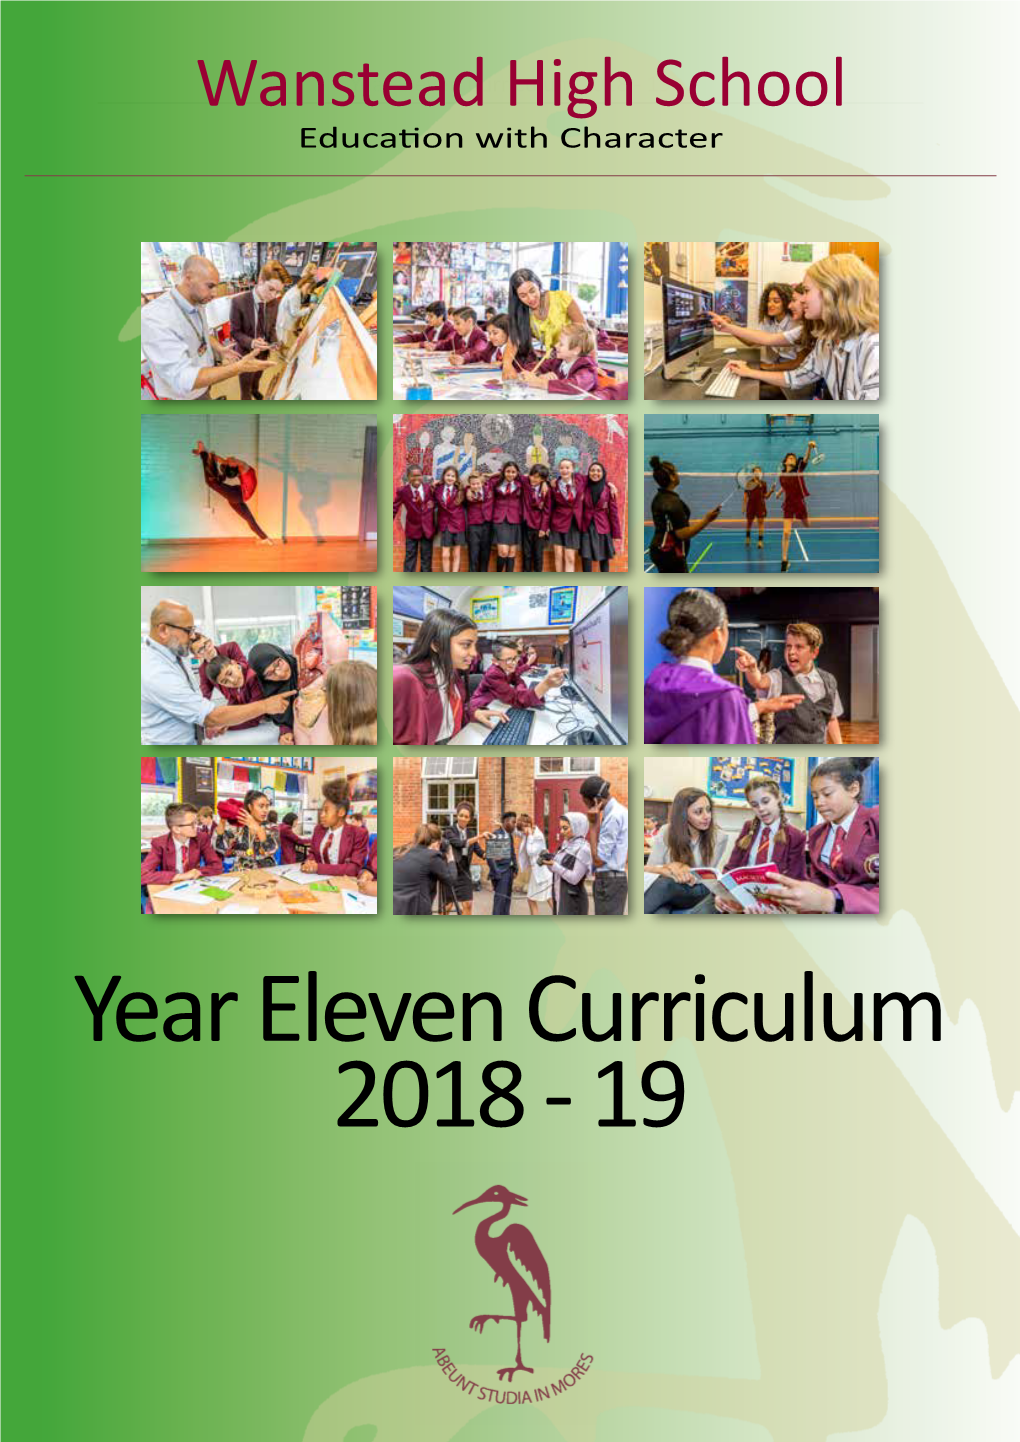 Year Eleven Curriculum 2018 - 19 Year Eleven Curriculum 2018 - 19 Year Eleven Curriculum 2018 - 19 Wanstead High School Education with Character